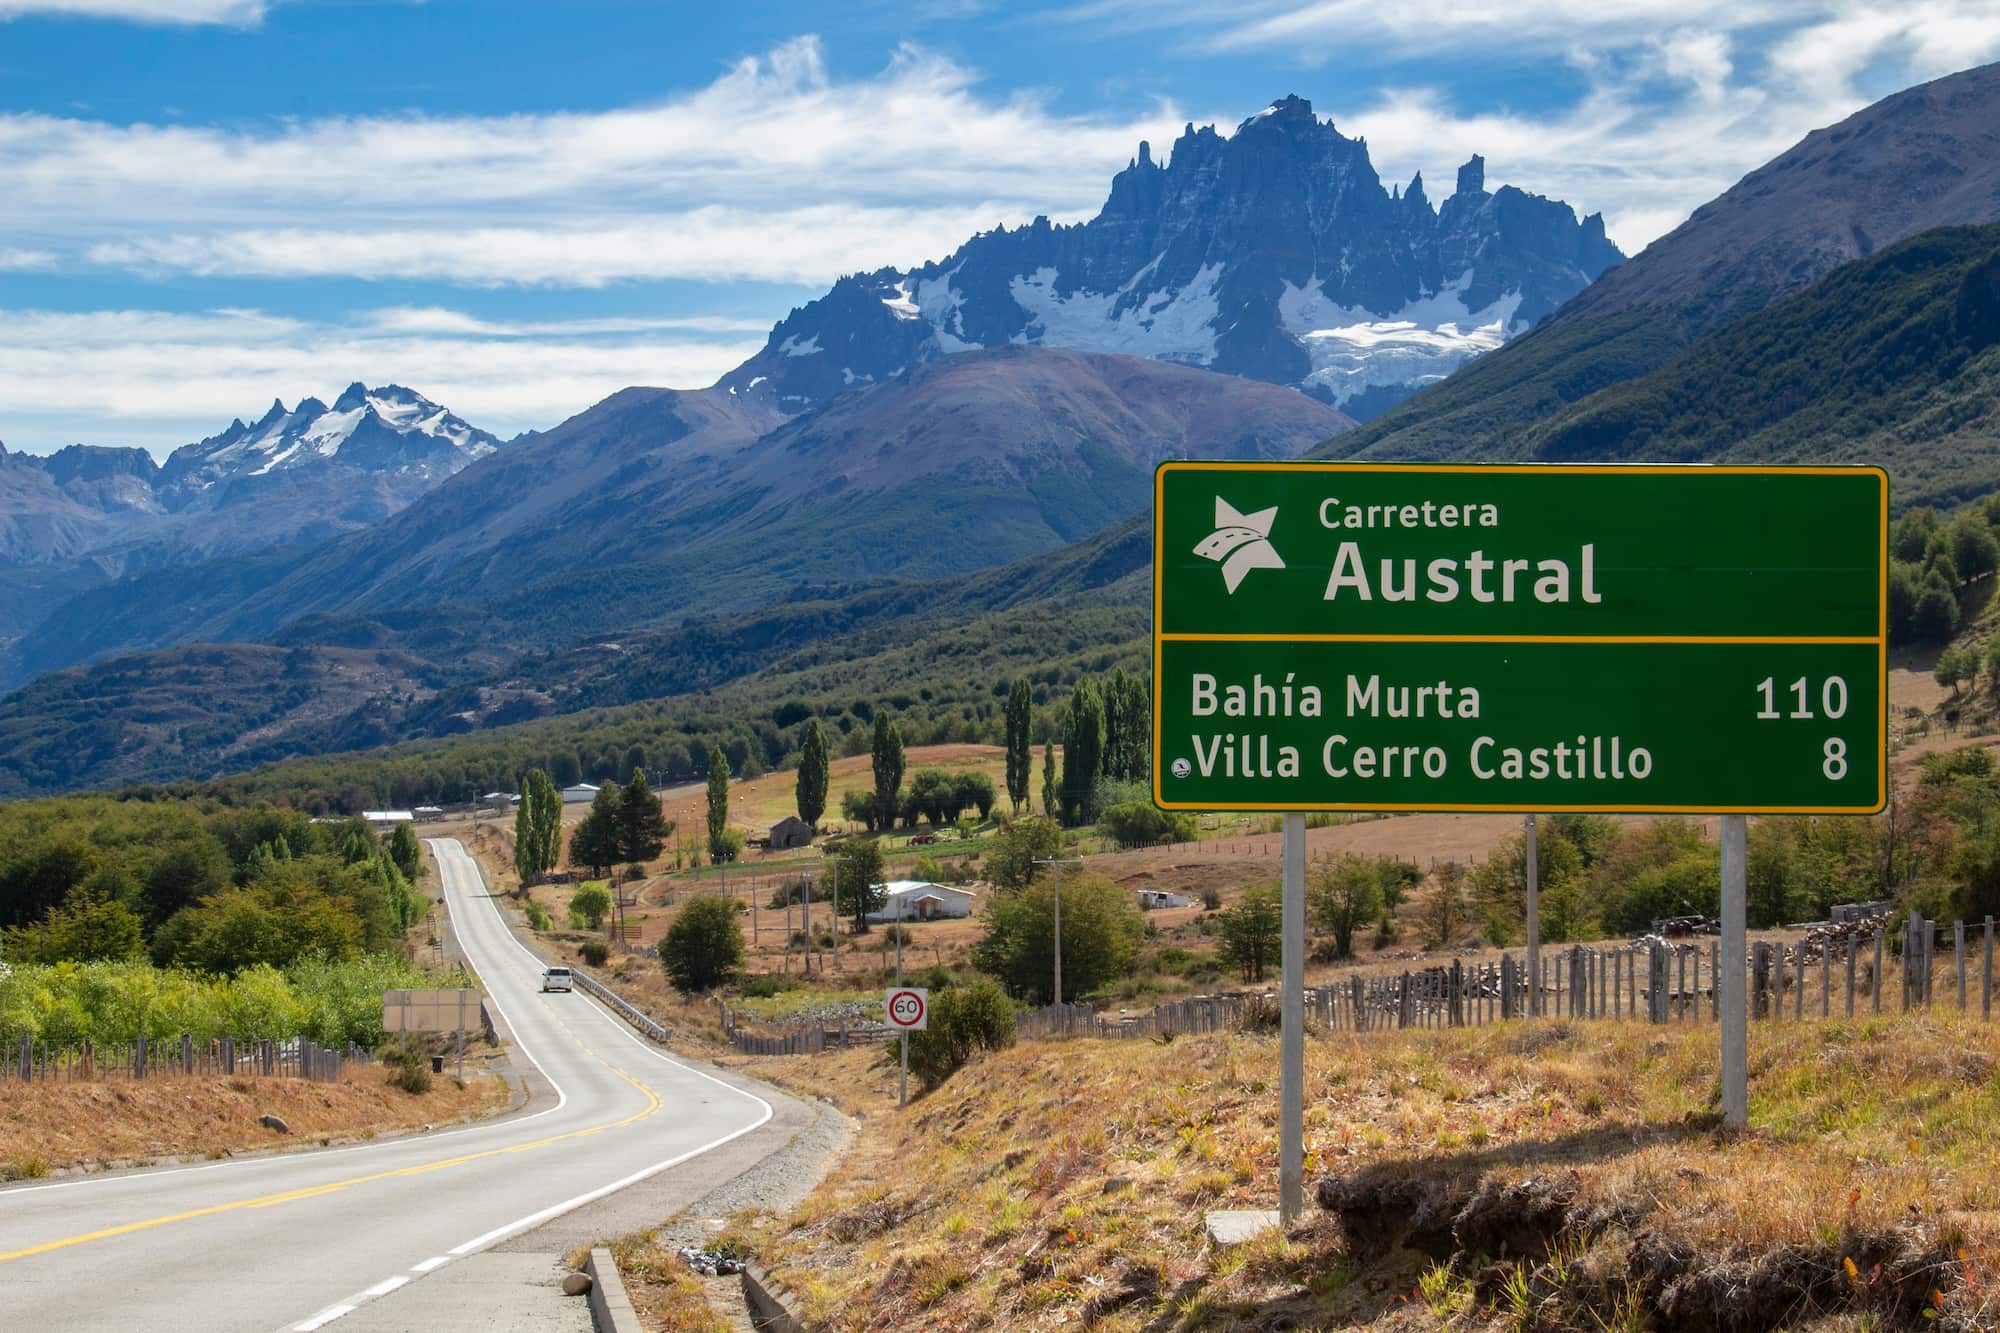 Carretera Austral Patagonia Chile thing to do